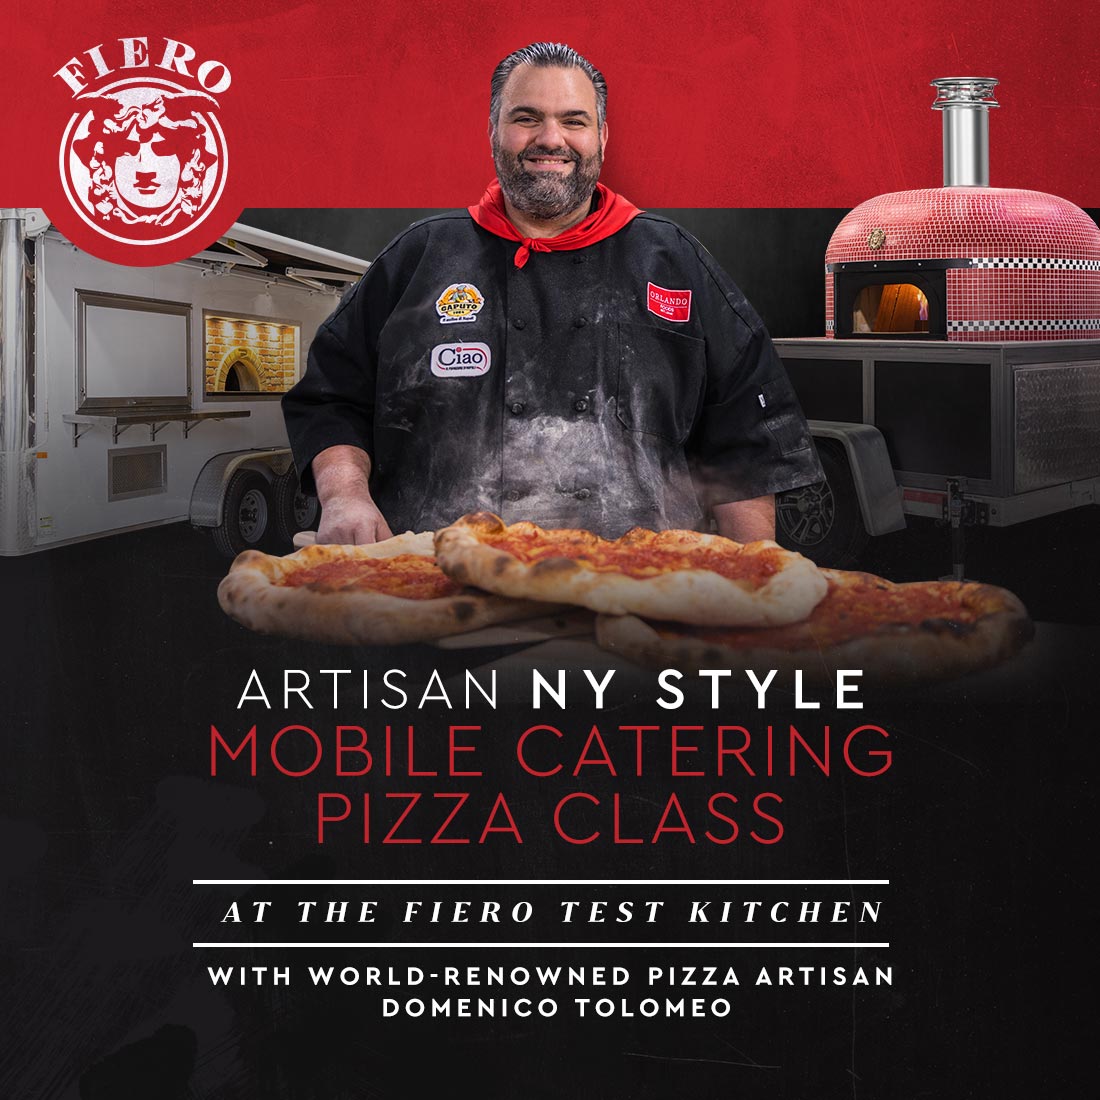 Artisan NY Style Mobile Catering Pizza Class with Domenico Tolomeo